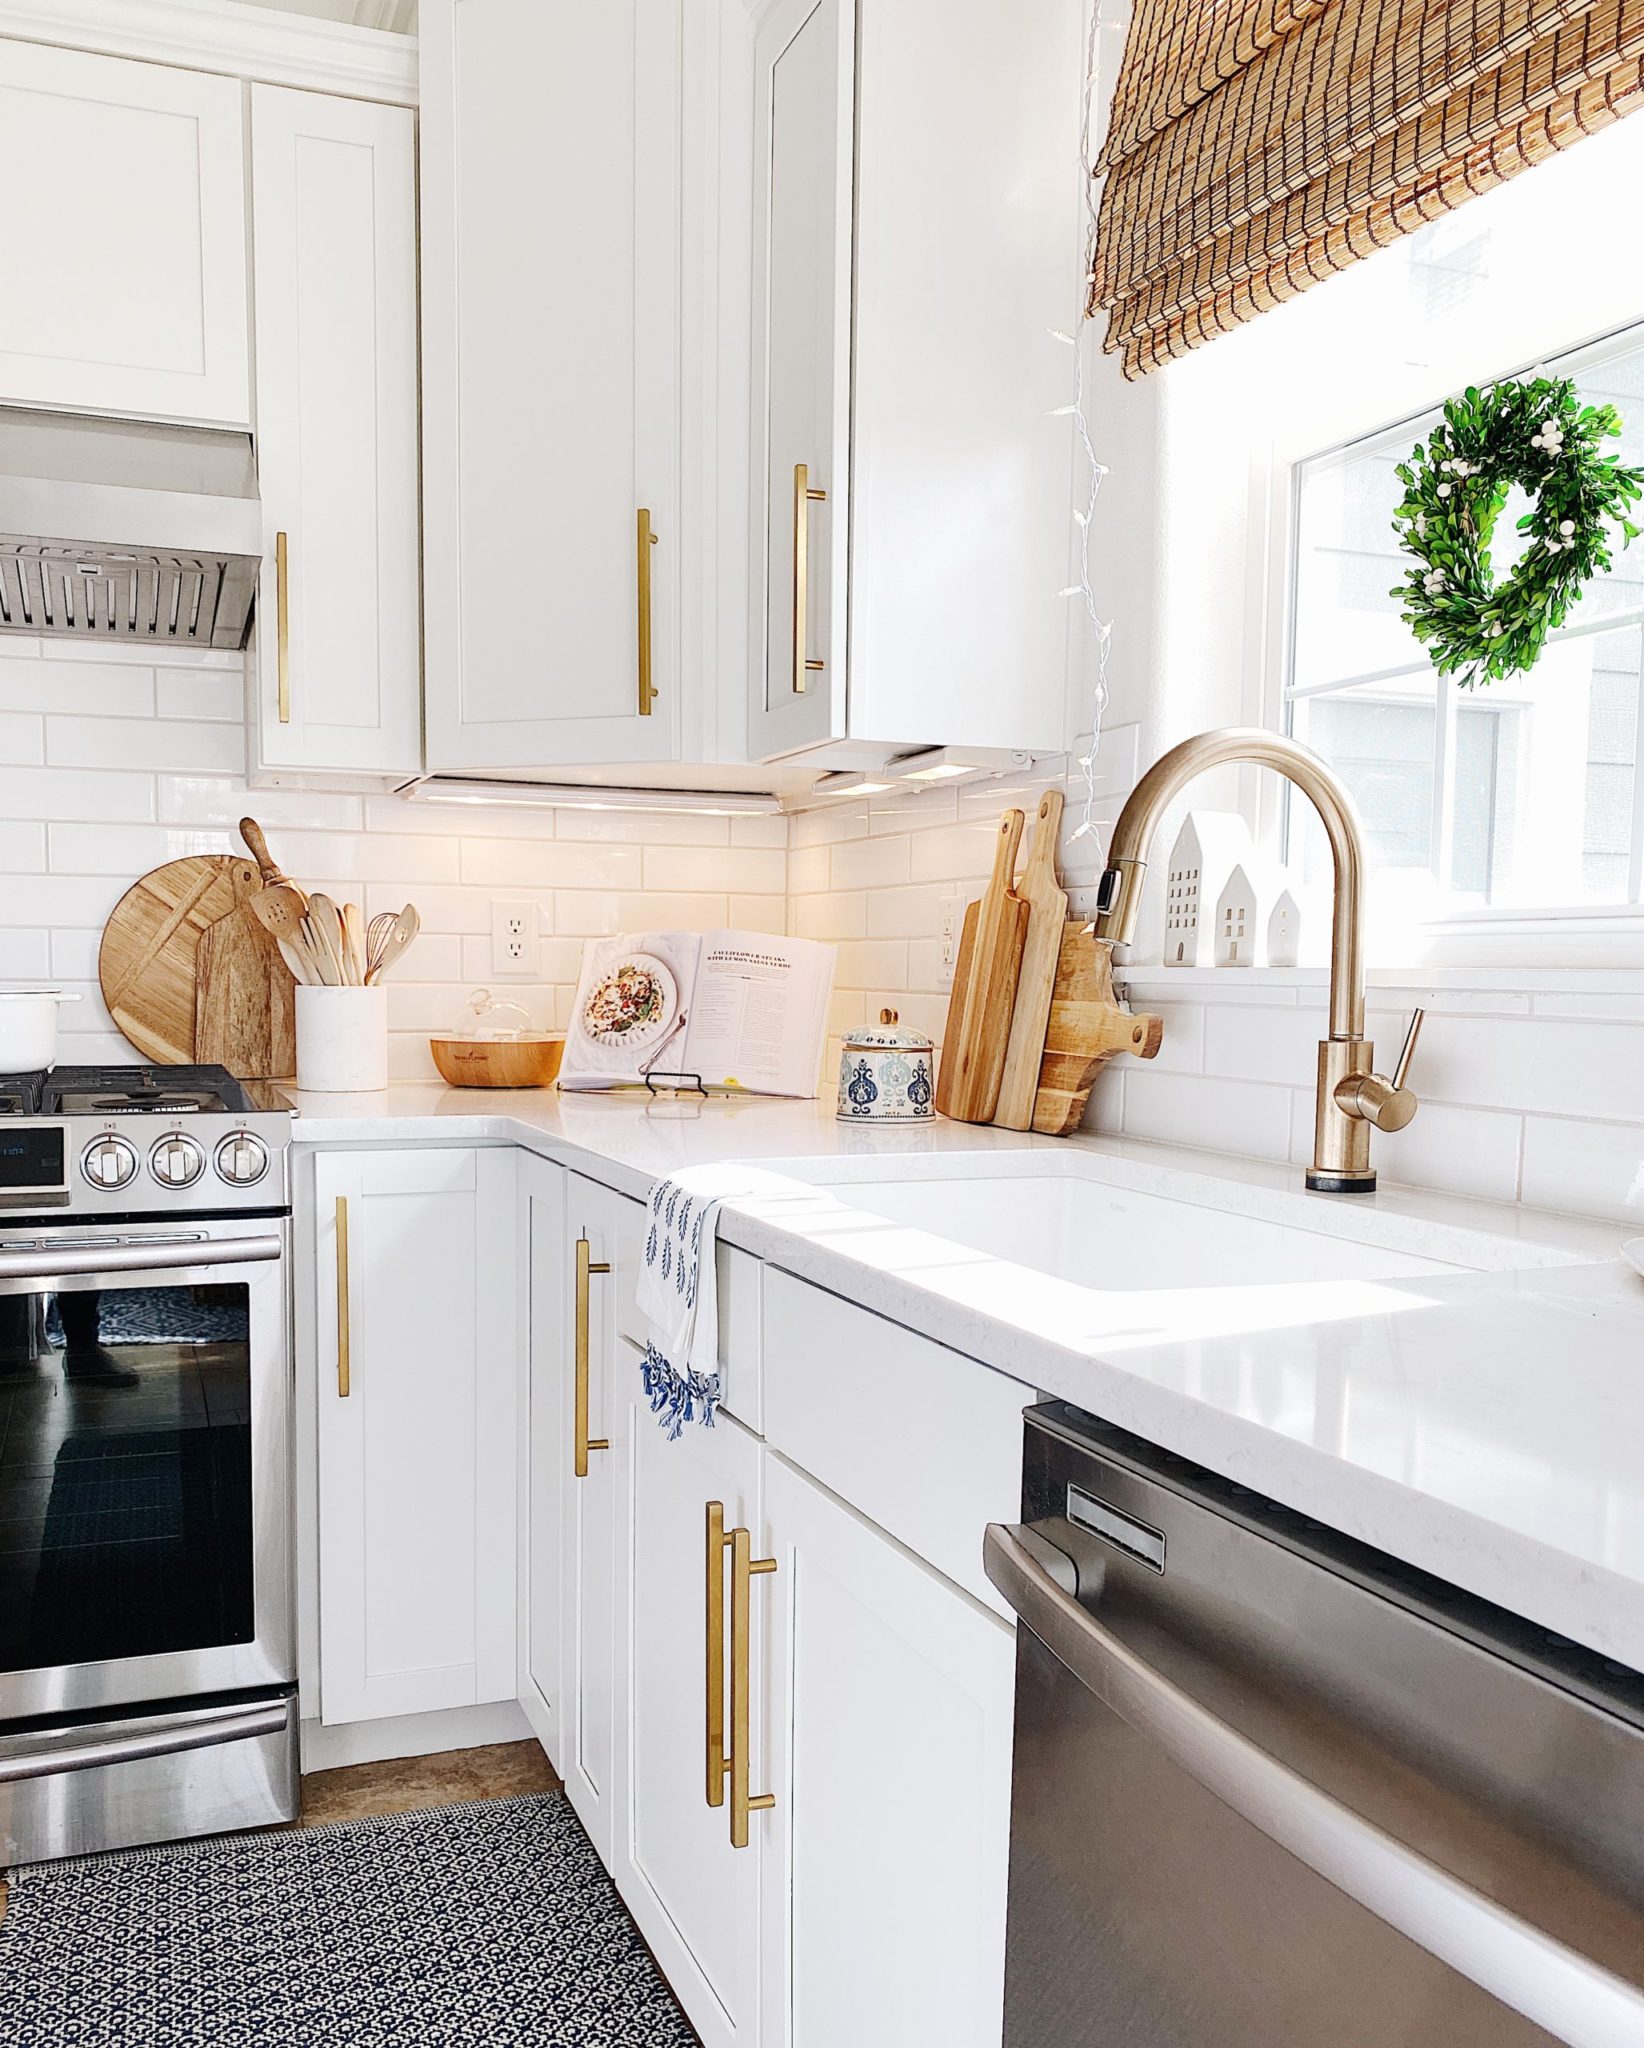 Love adding twinkle lights and Christmas wreaths to the kitchen during the holidays! #christmasdecor #homedecor #home #styling